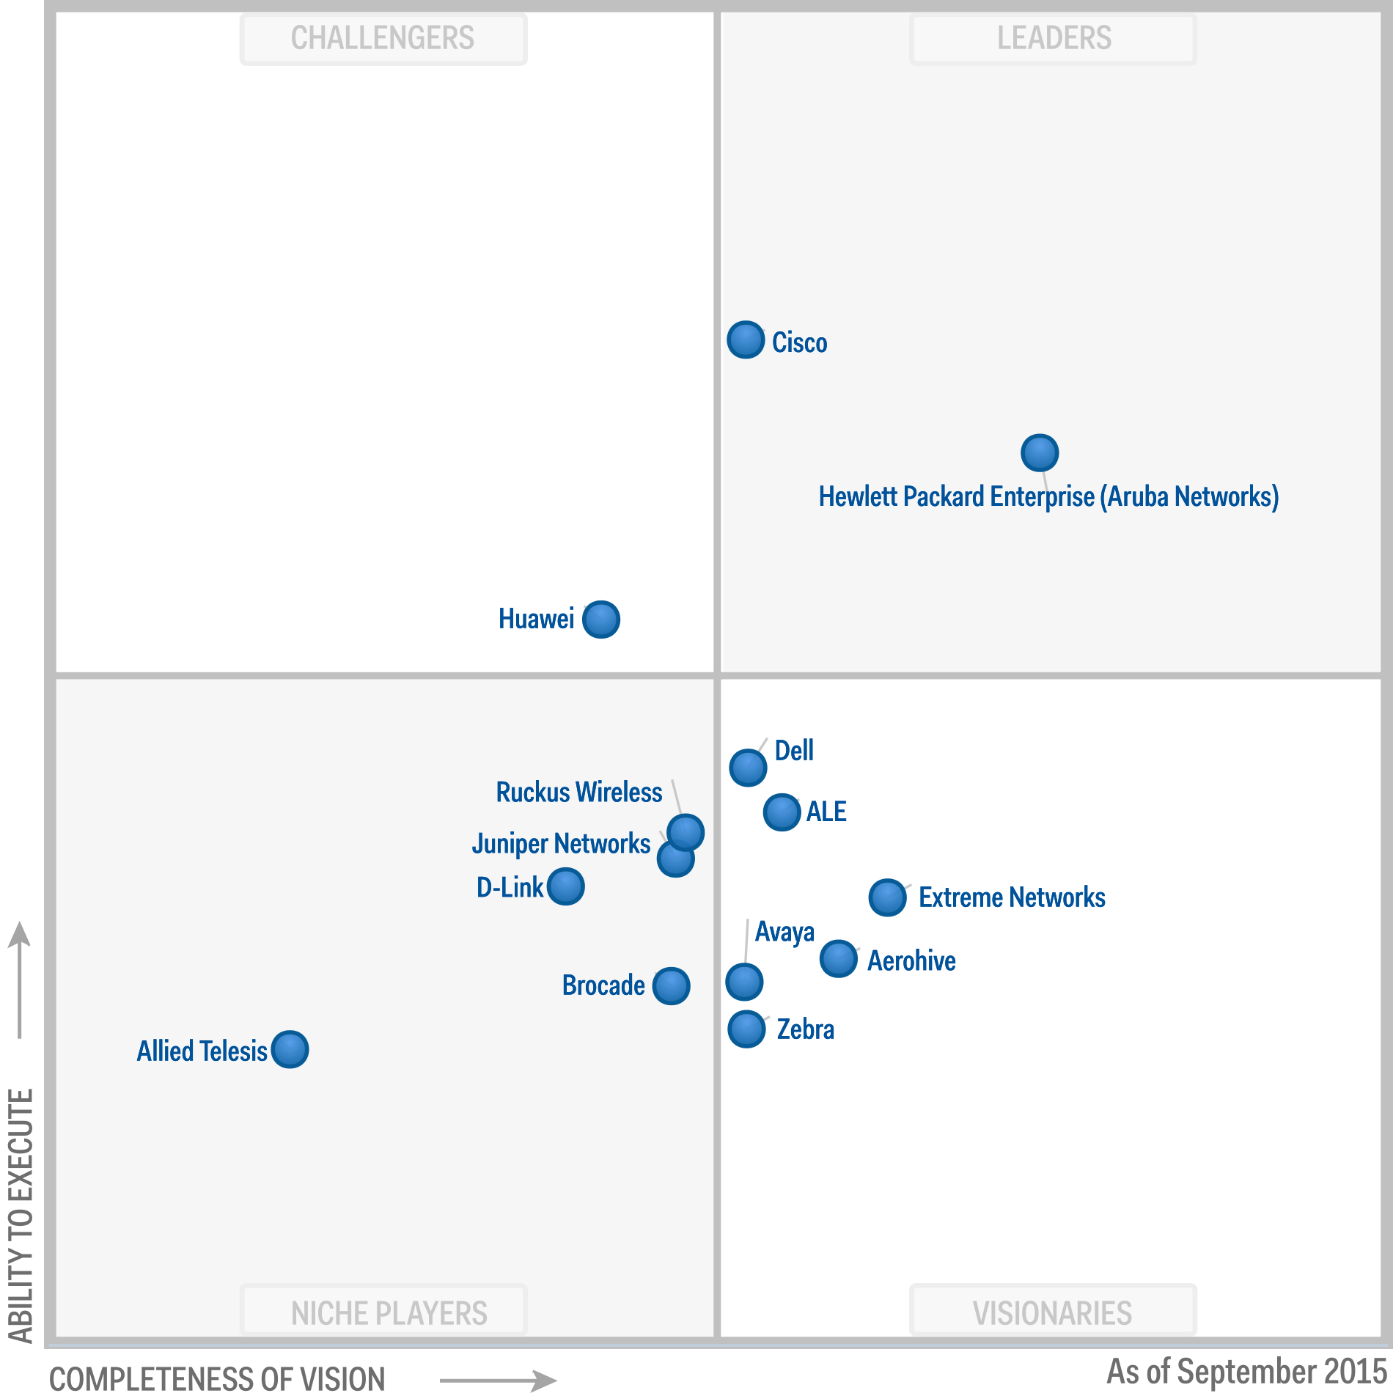 Magic Quadrant for the Wired and Wireless LAN Access Infrastructure_2015